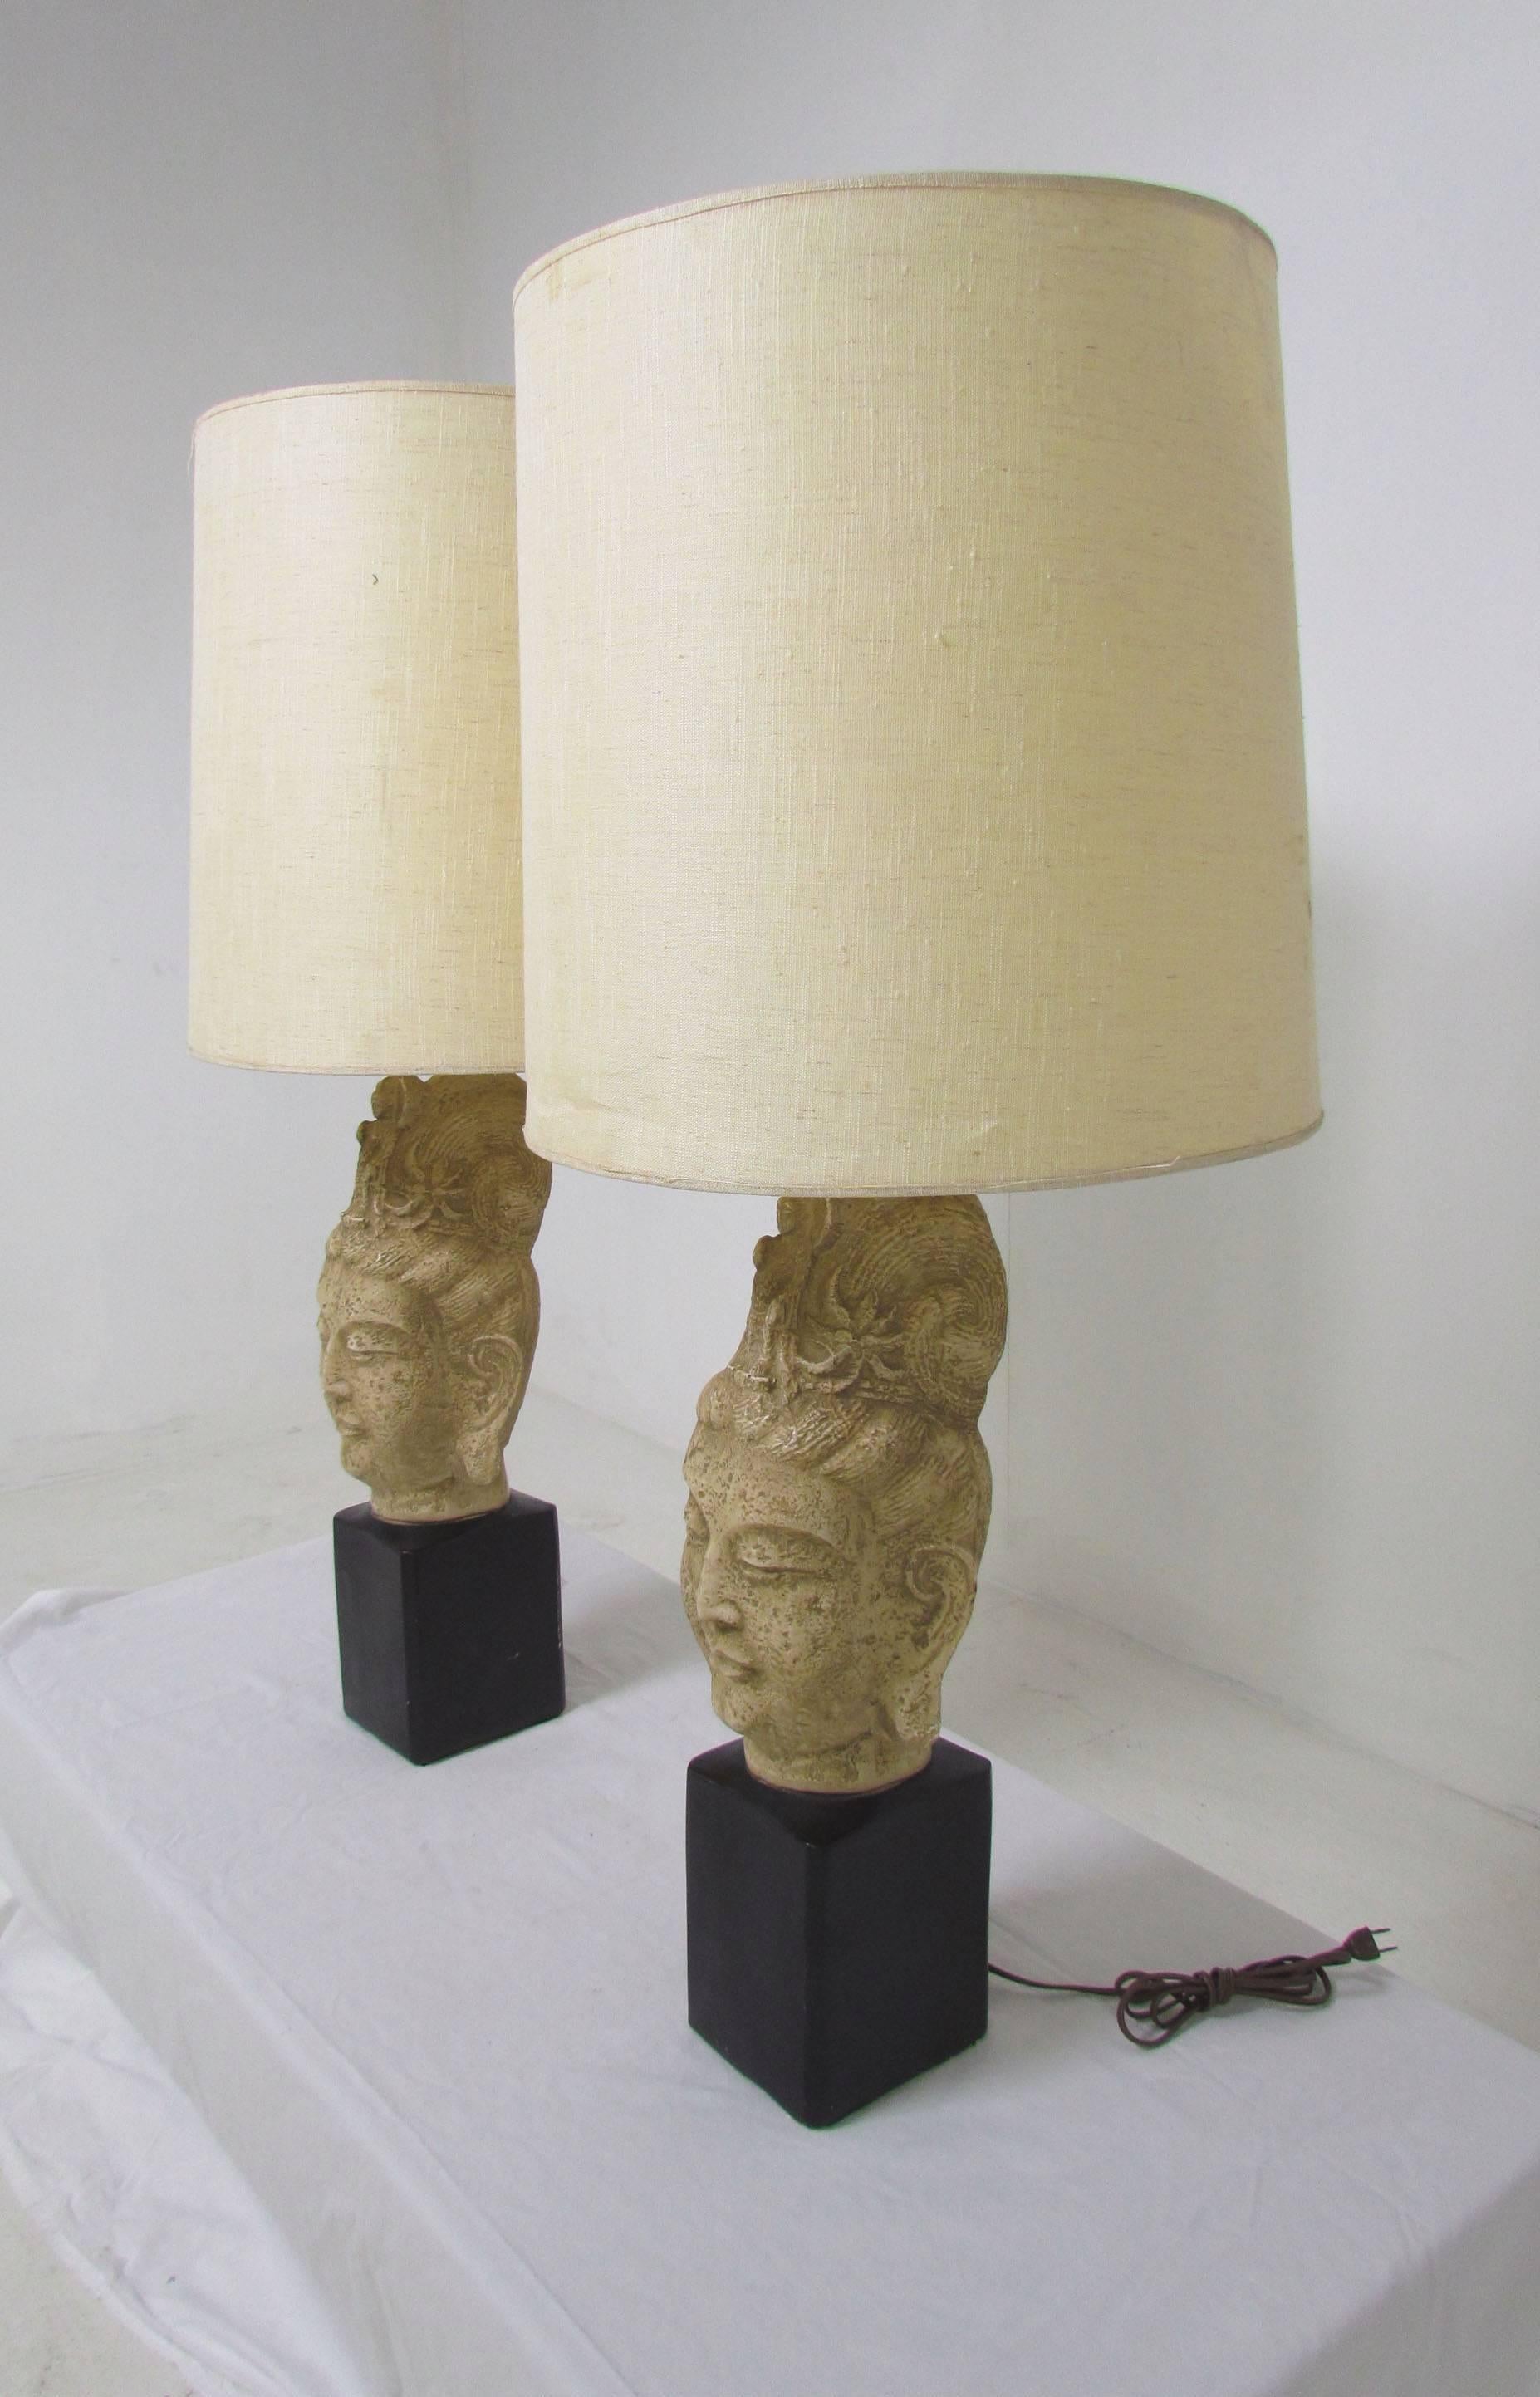 Pair of Buddha Table Lamps in the Manner of James Mont In Good Condition For Sale In Peabody, MA